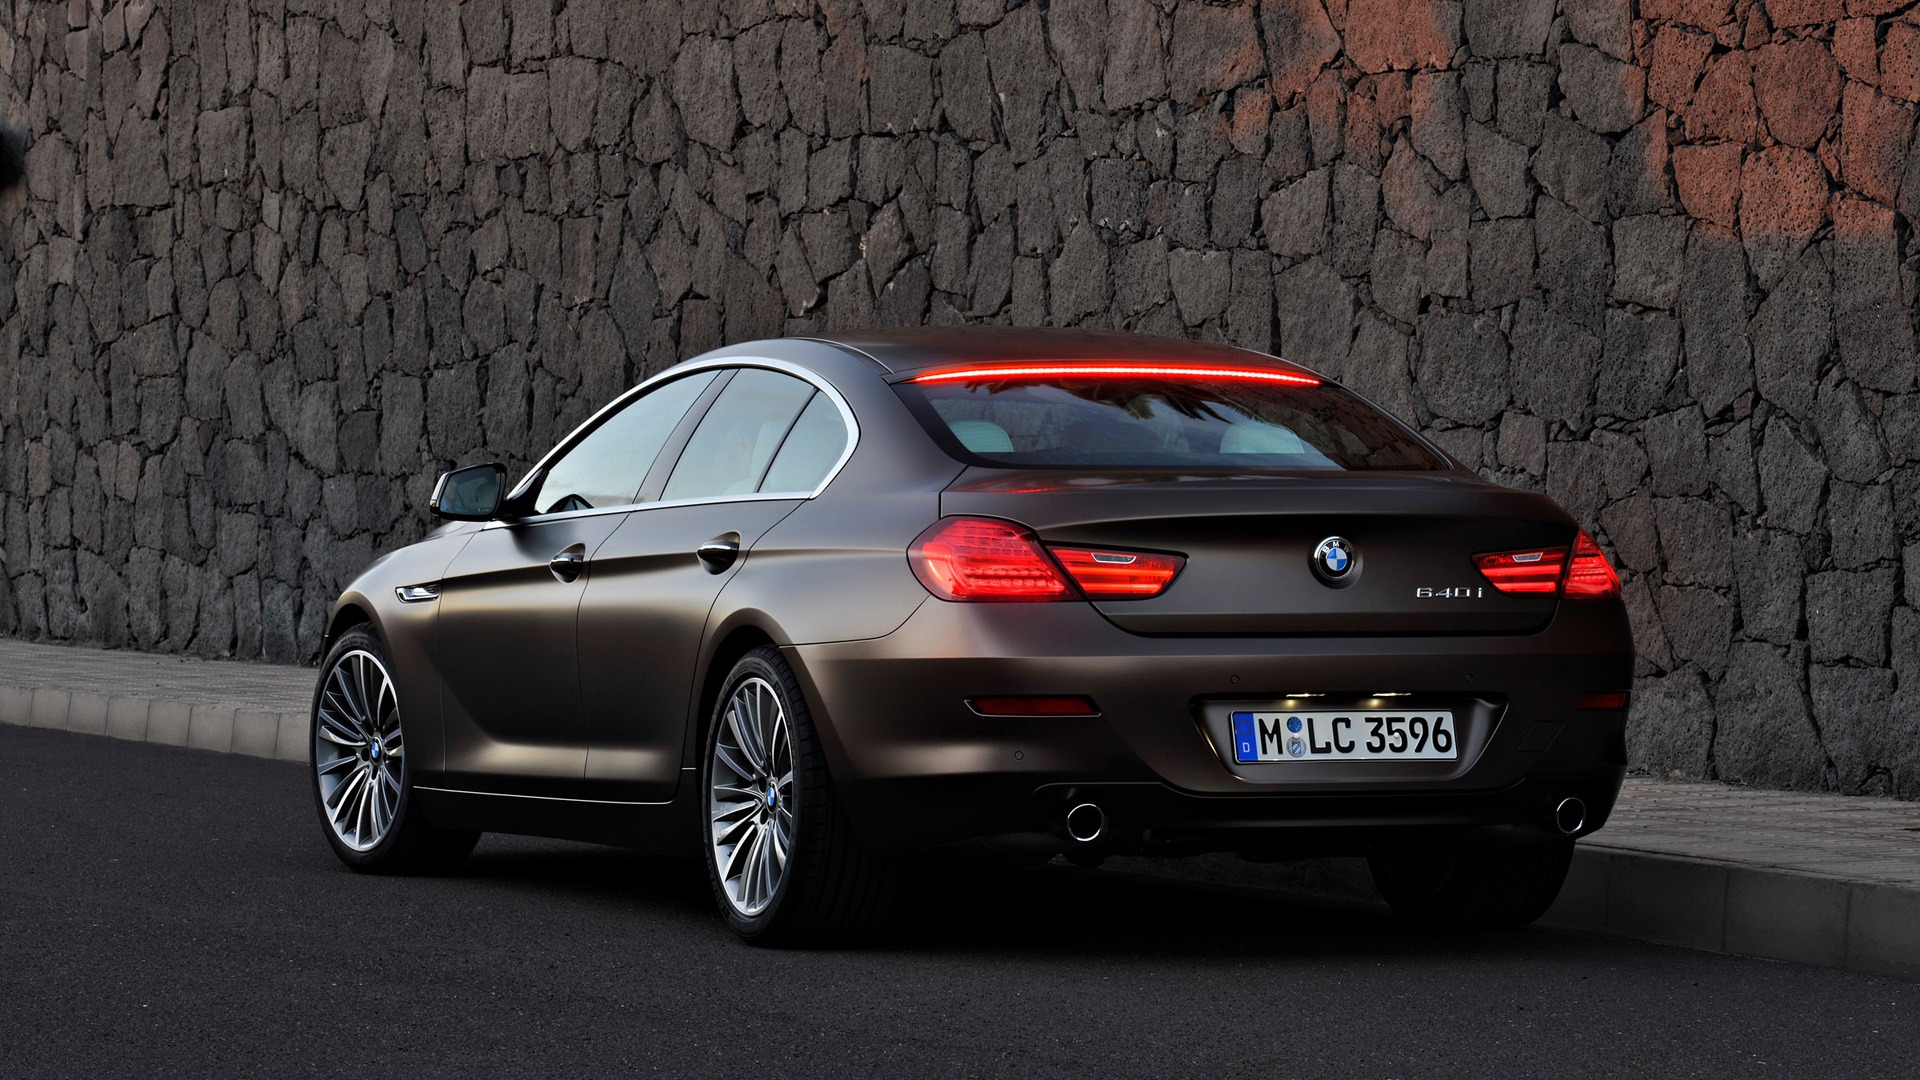 BMW 6 Gran Coupe Rear for 1920 x 1080 HDTV 1080p resolution